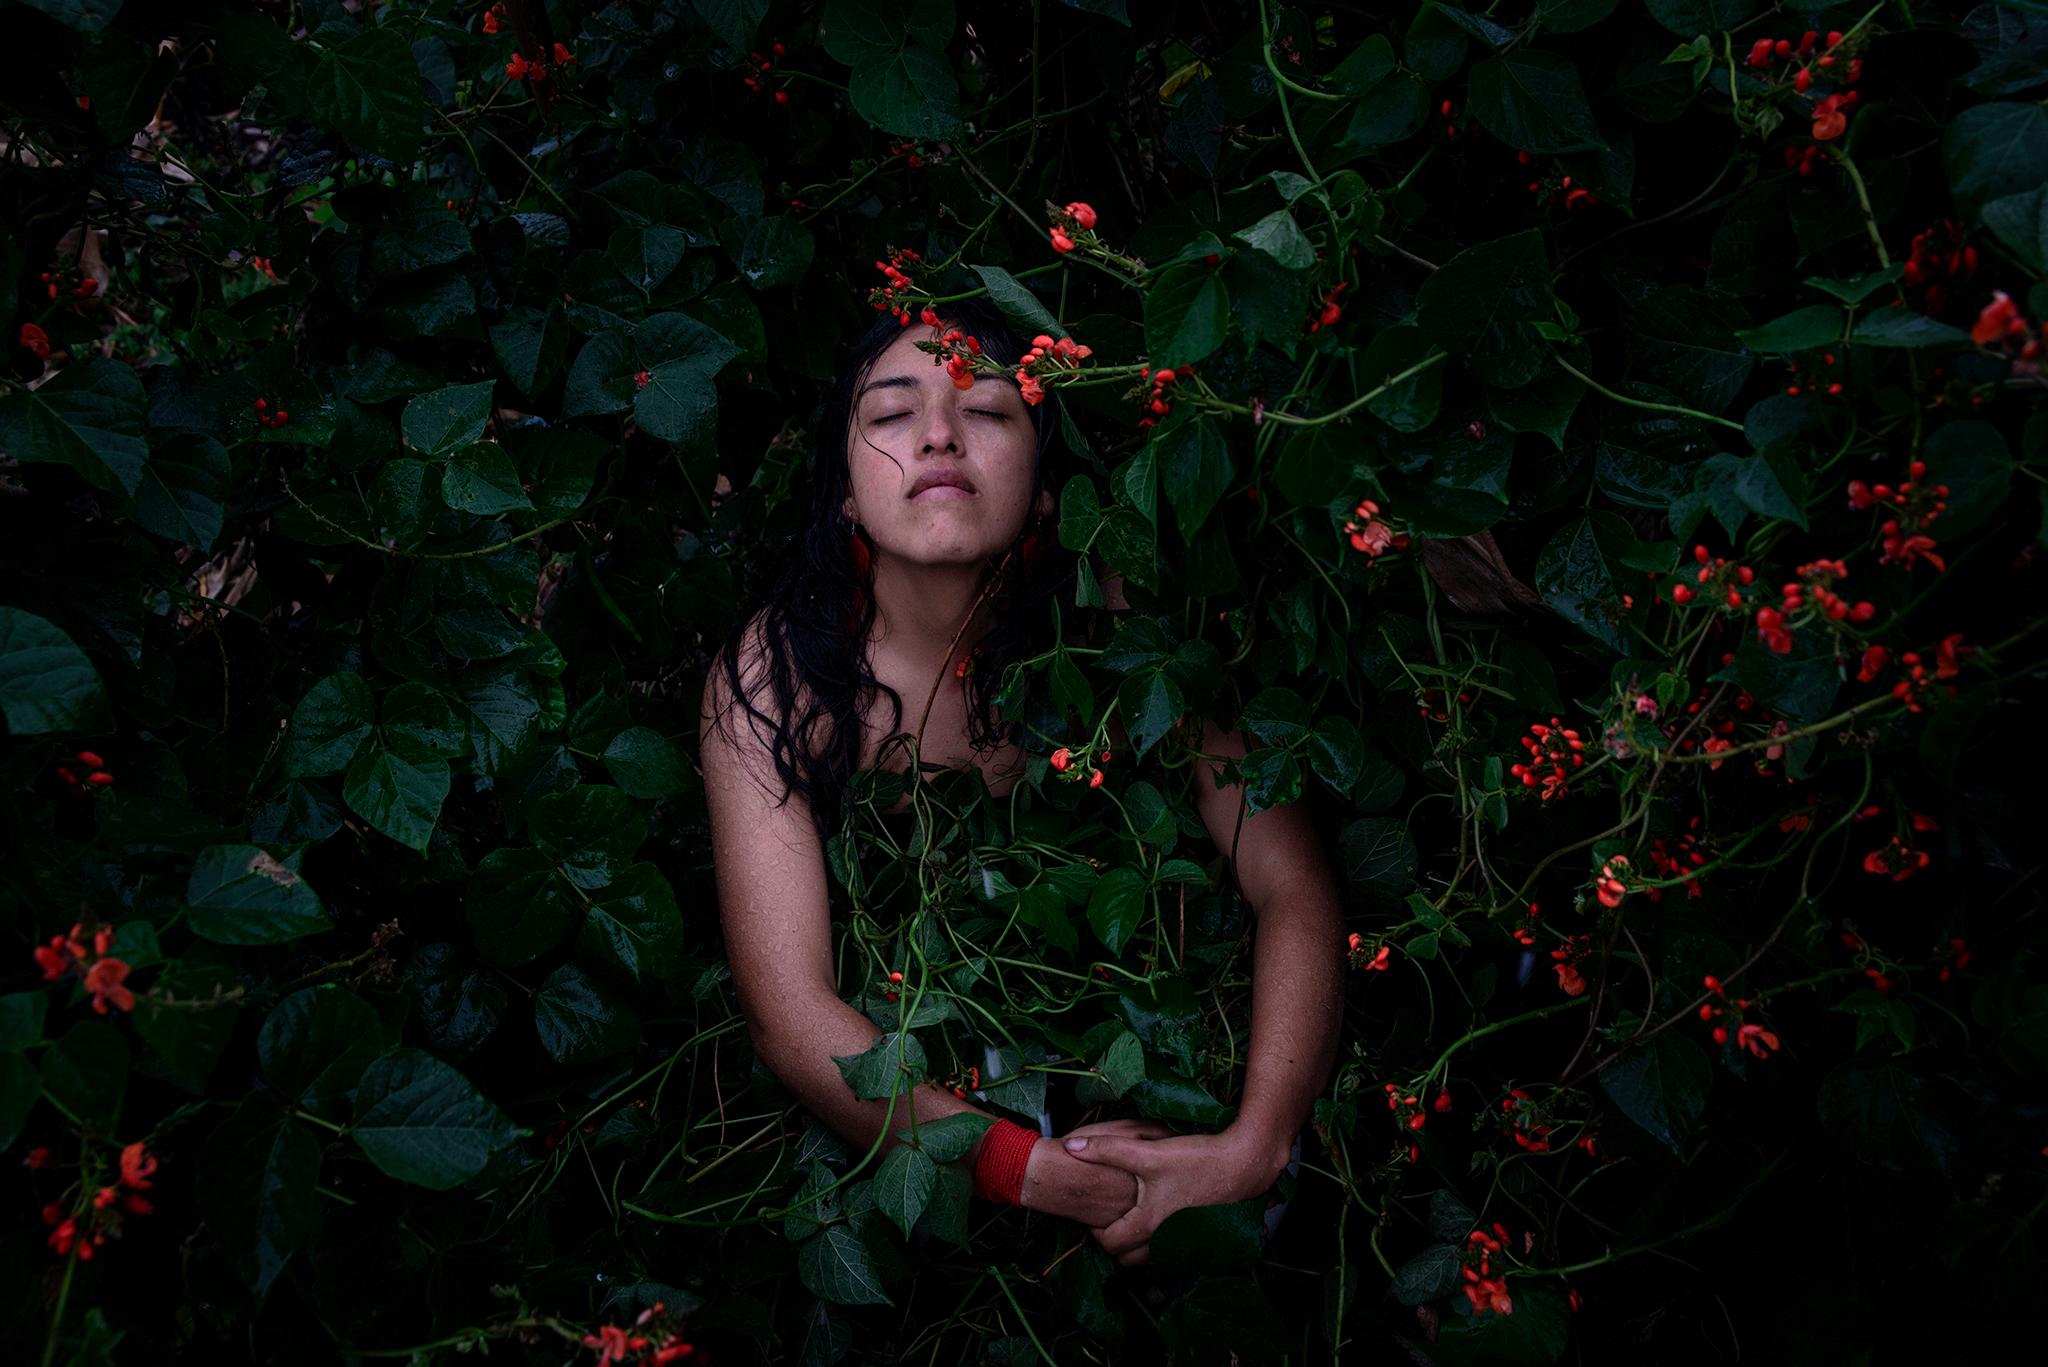 A ti vuelvo - Self-portrait in the beans of my garden. Since the...